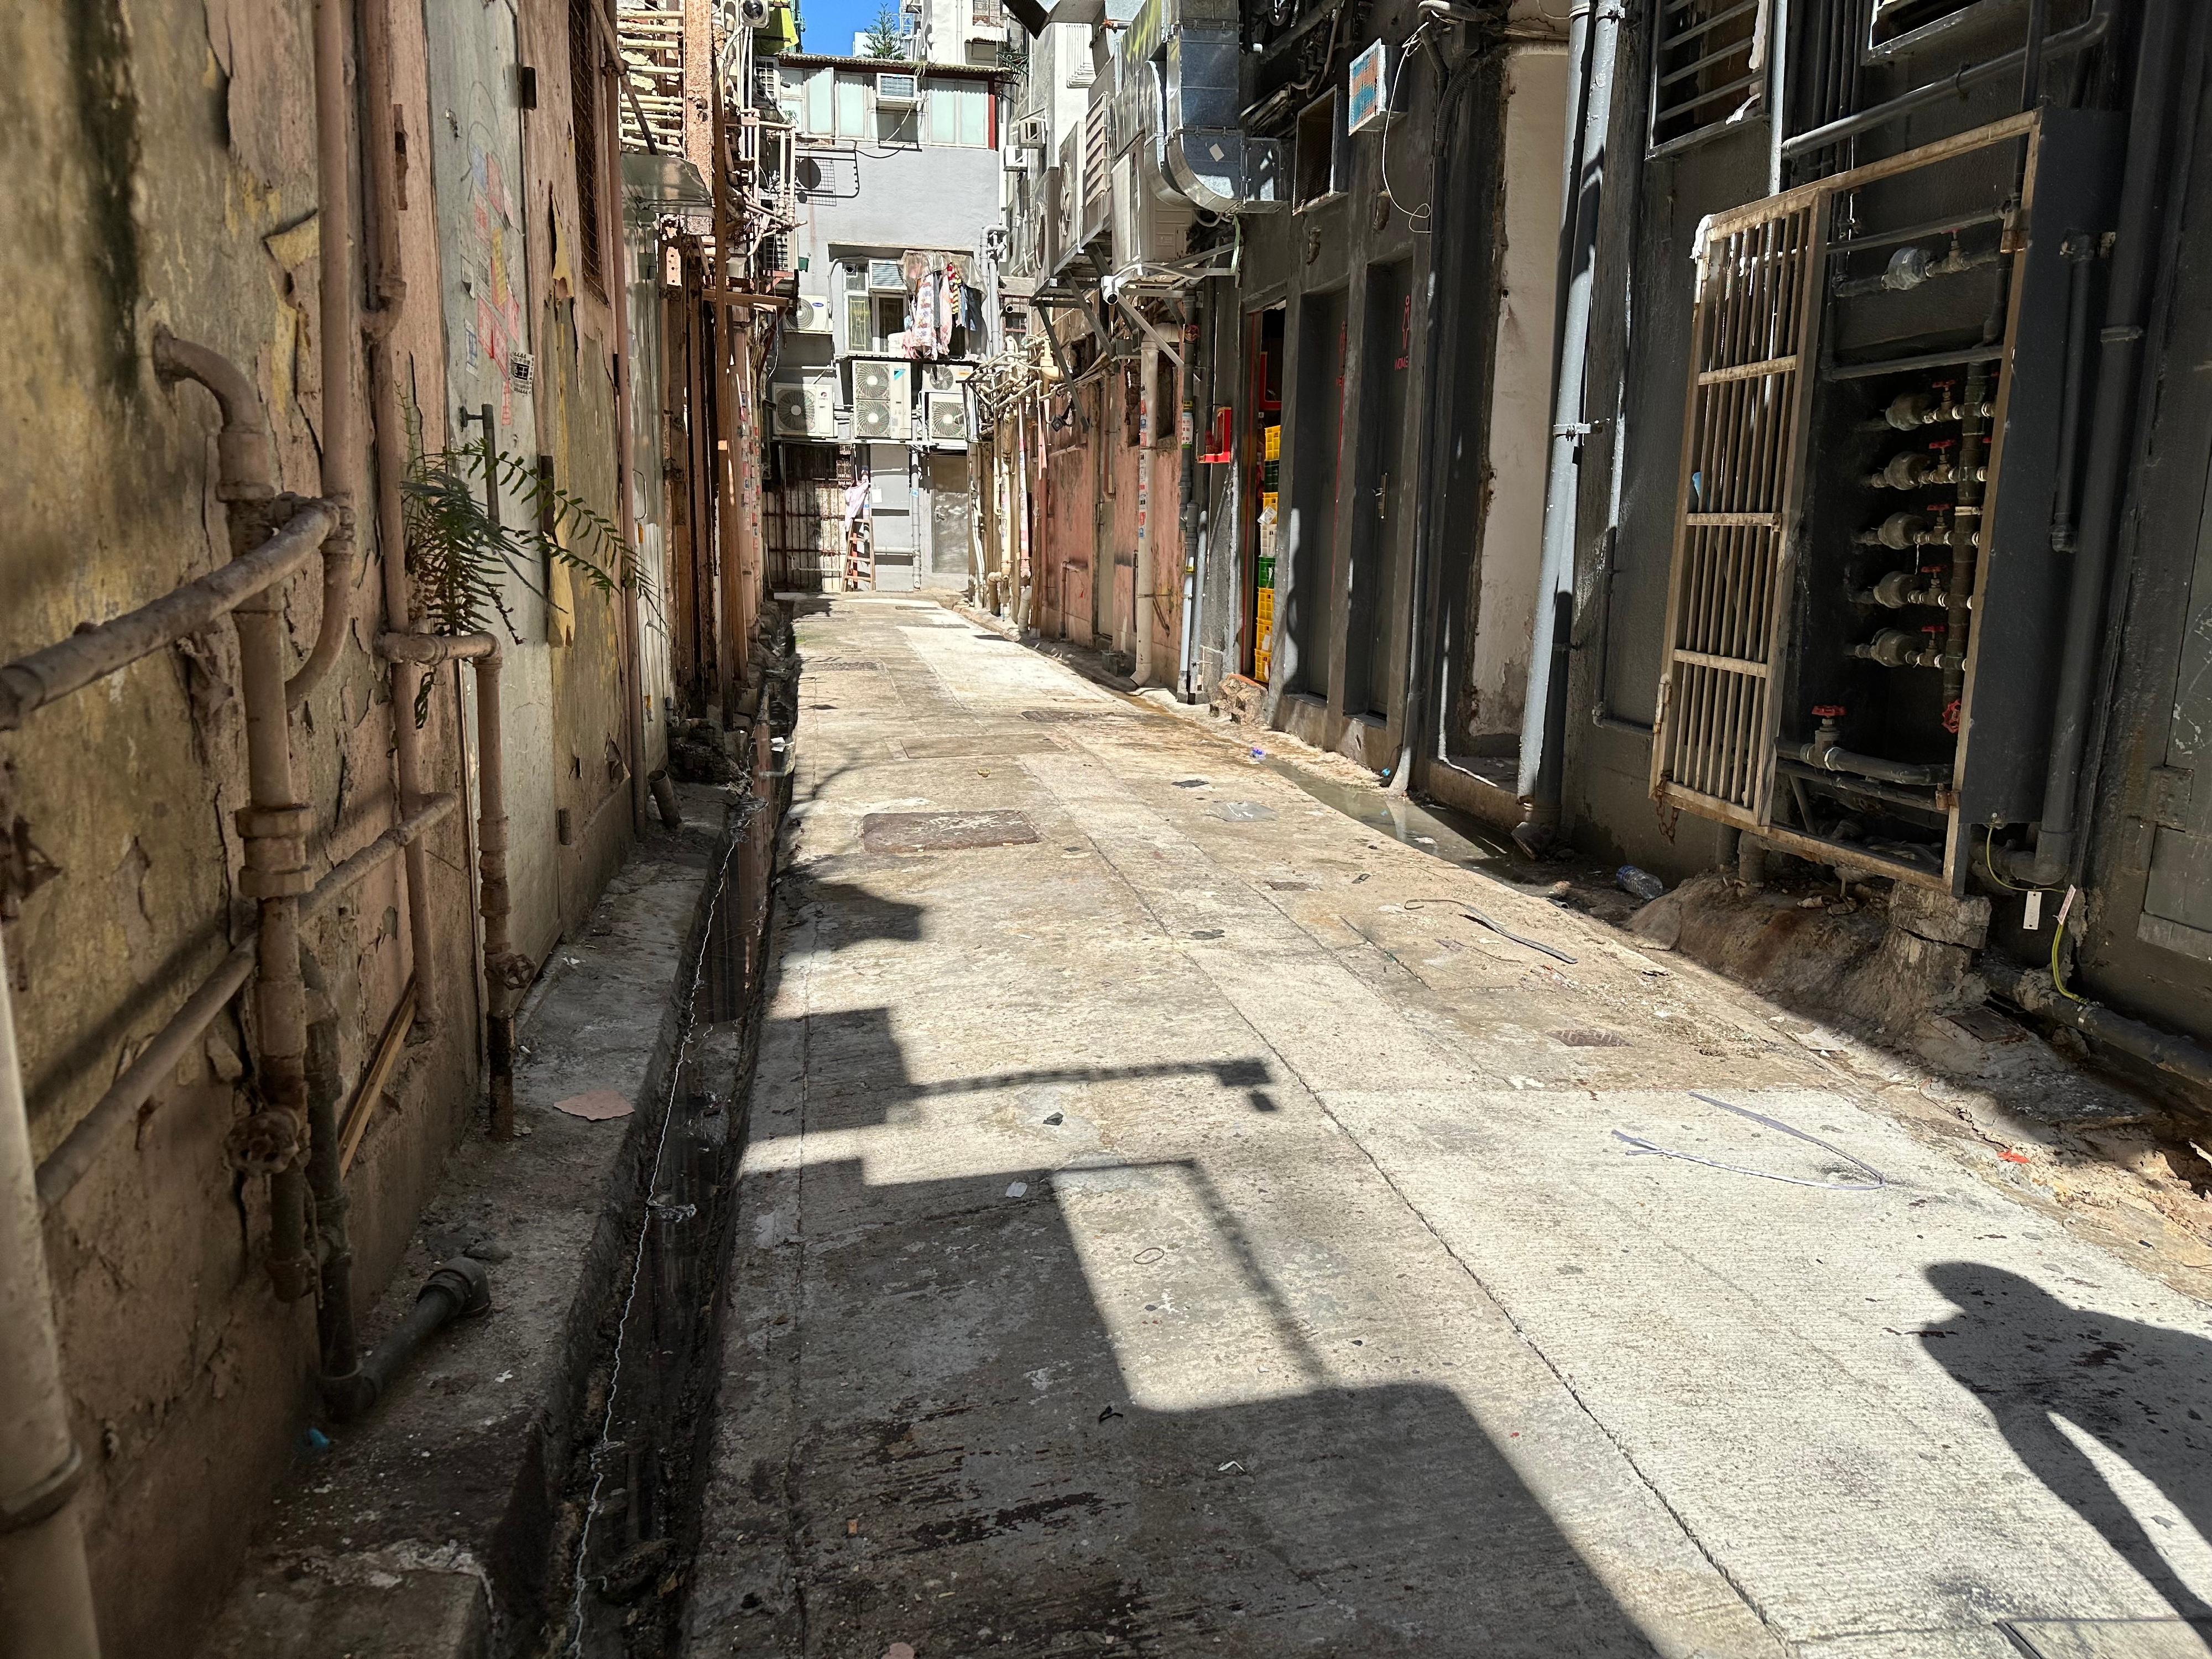 The Home Affairs Department and its District Offices conducted a series of cleaning works, publicity and educational activities during July and October to support the Government Programme on Tackling Hygiene Black Spots launched under the District Matters Co-ordination Task Force. Photo shows a back alley in Sham Shui Po after the joint operation for removal of abandoned vehicles co-ordinated by the Sham Shui Po District Office and relevant departments. 